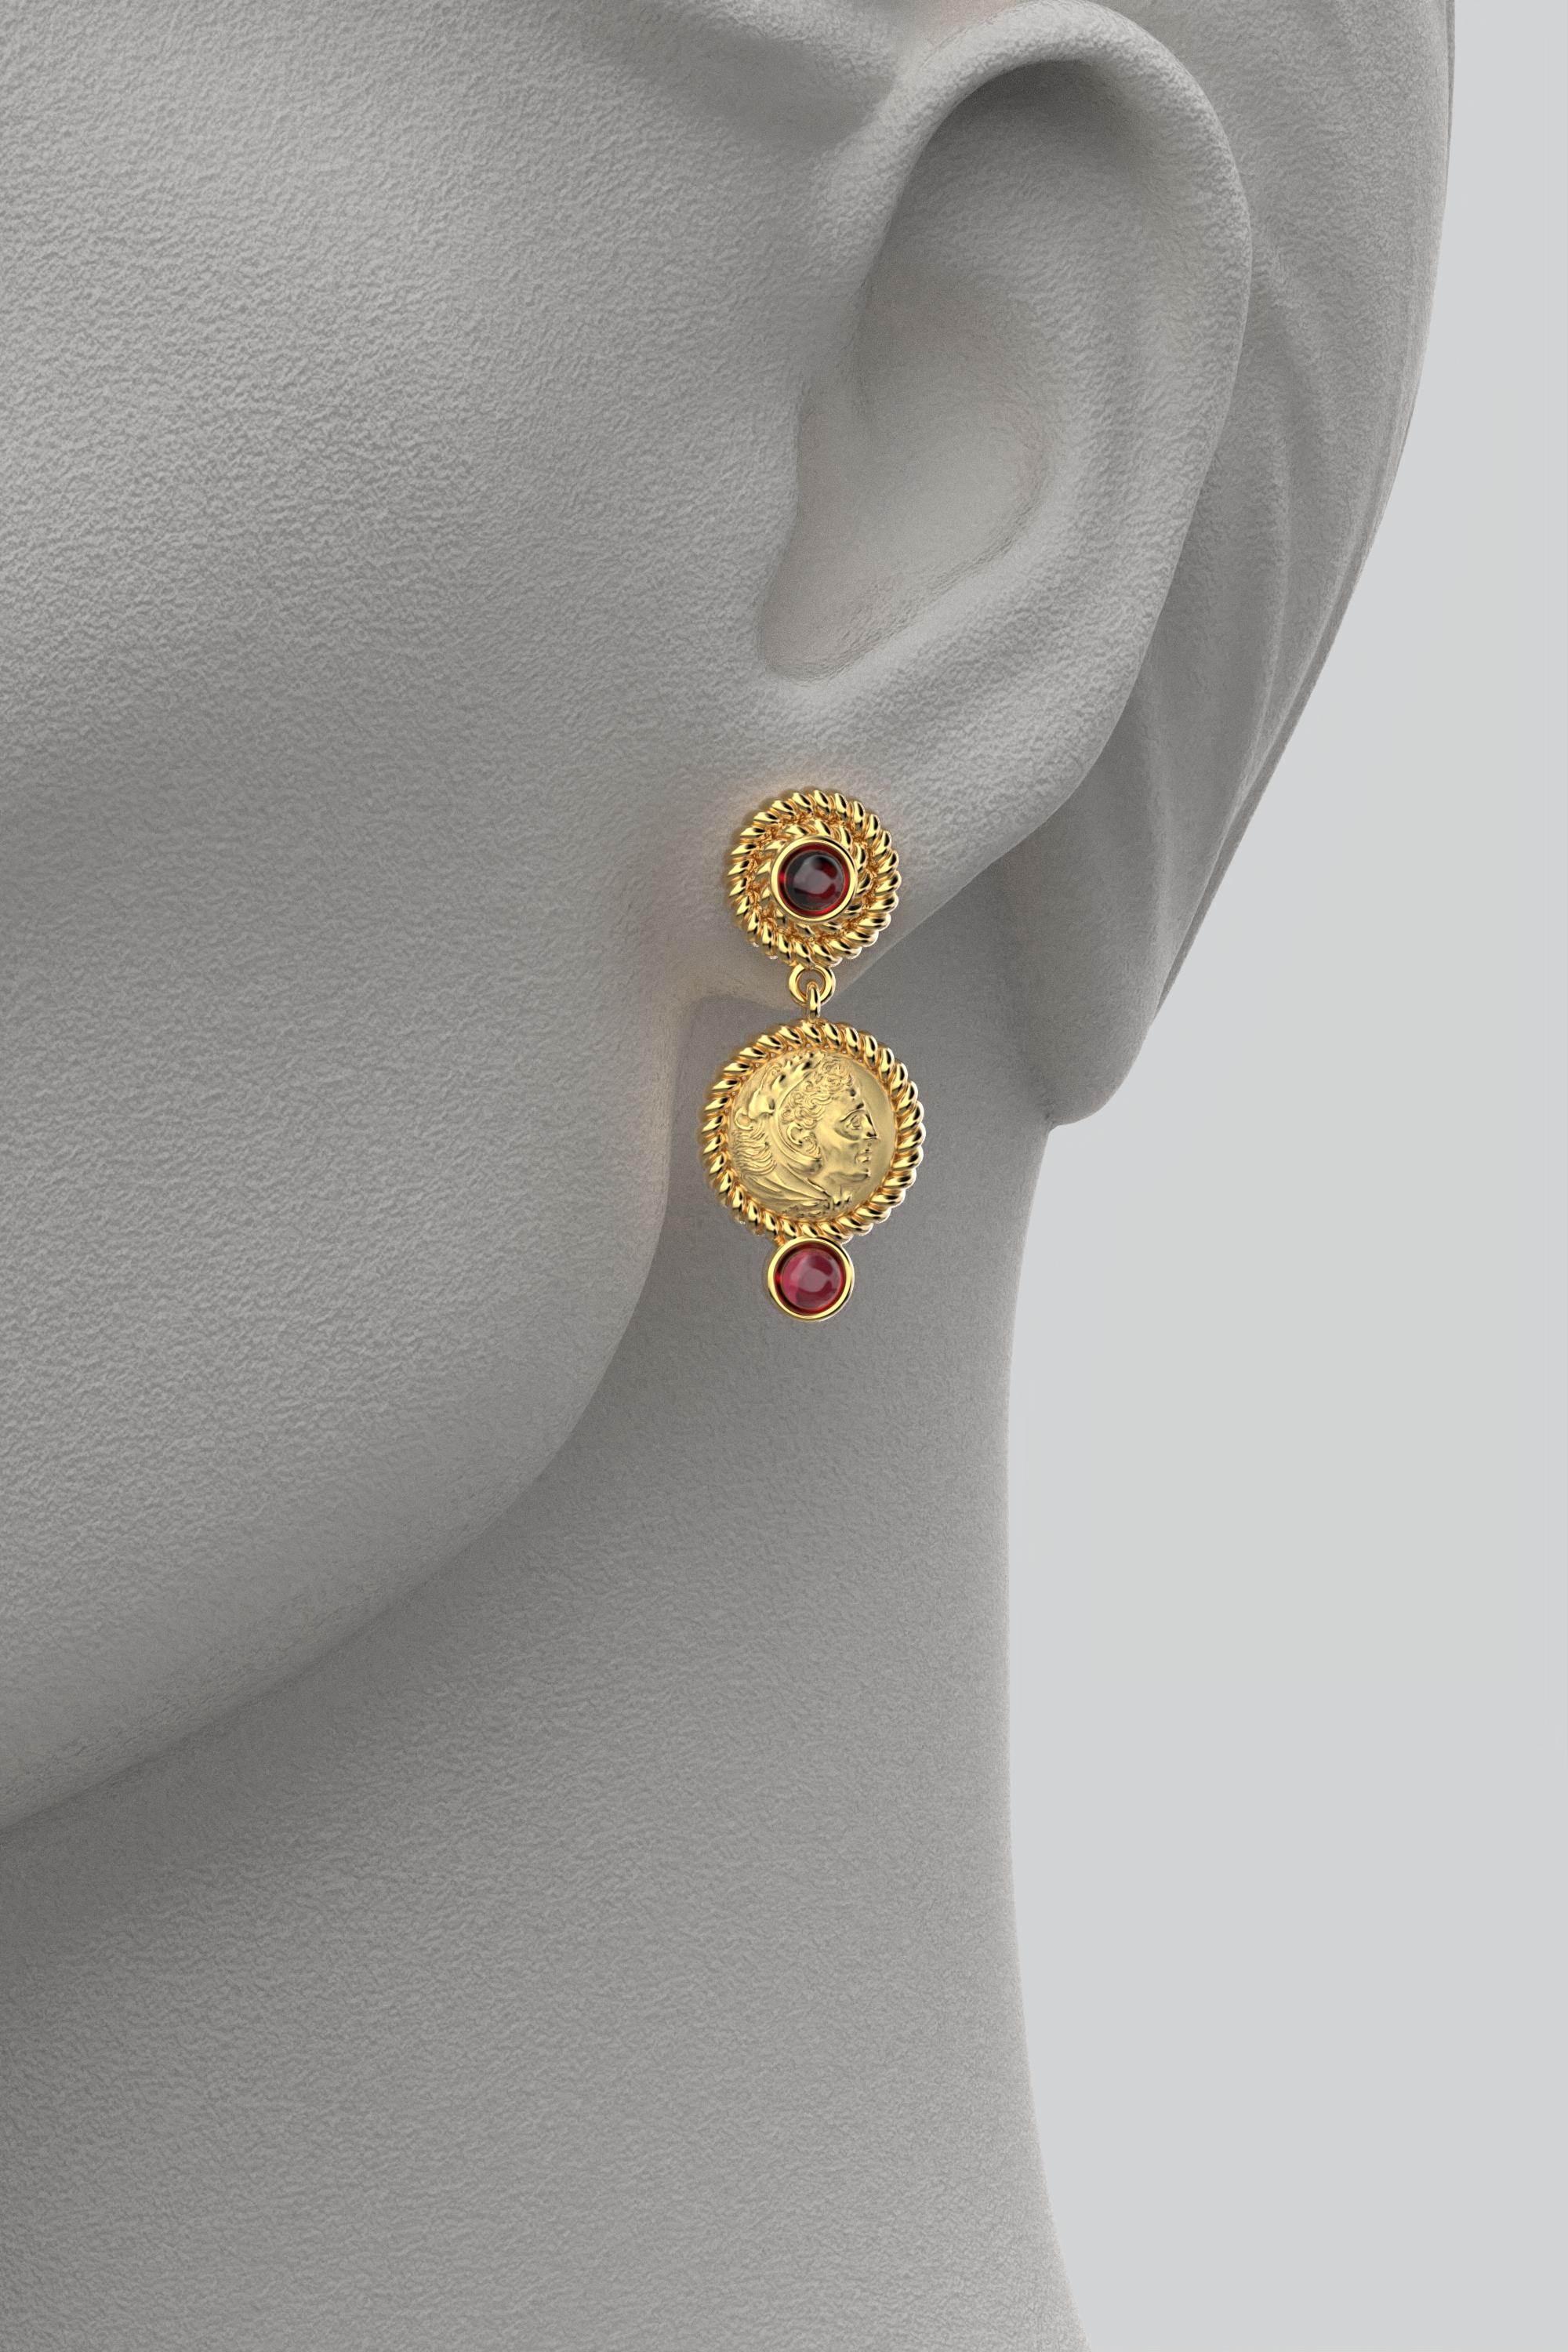 Cabochon Italian Jewelry  14k Gold Dangle Earrings With Garnets  Ancient Greek Style For Sale